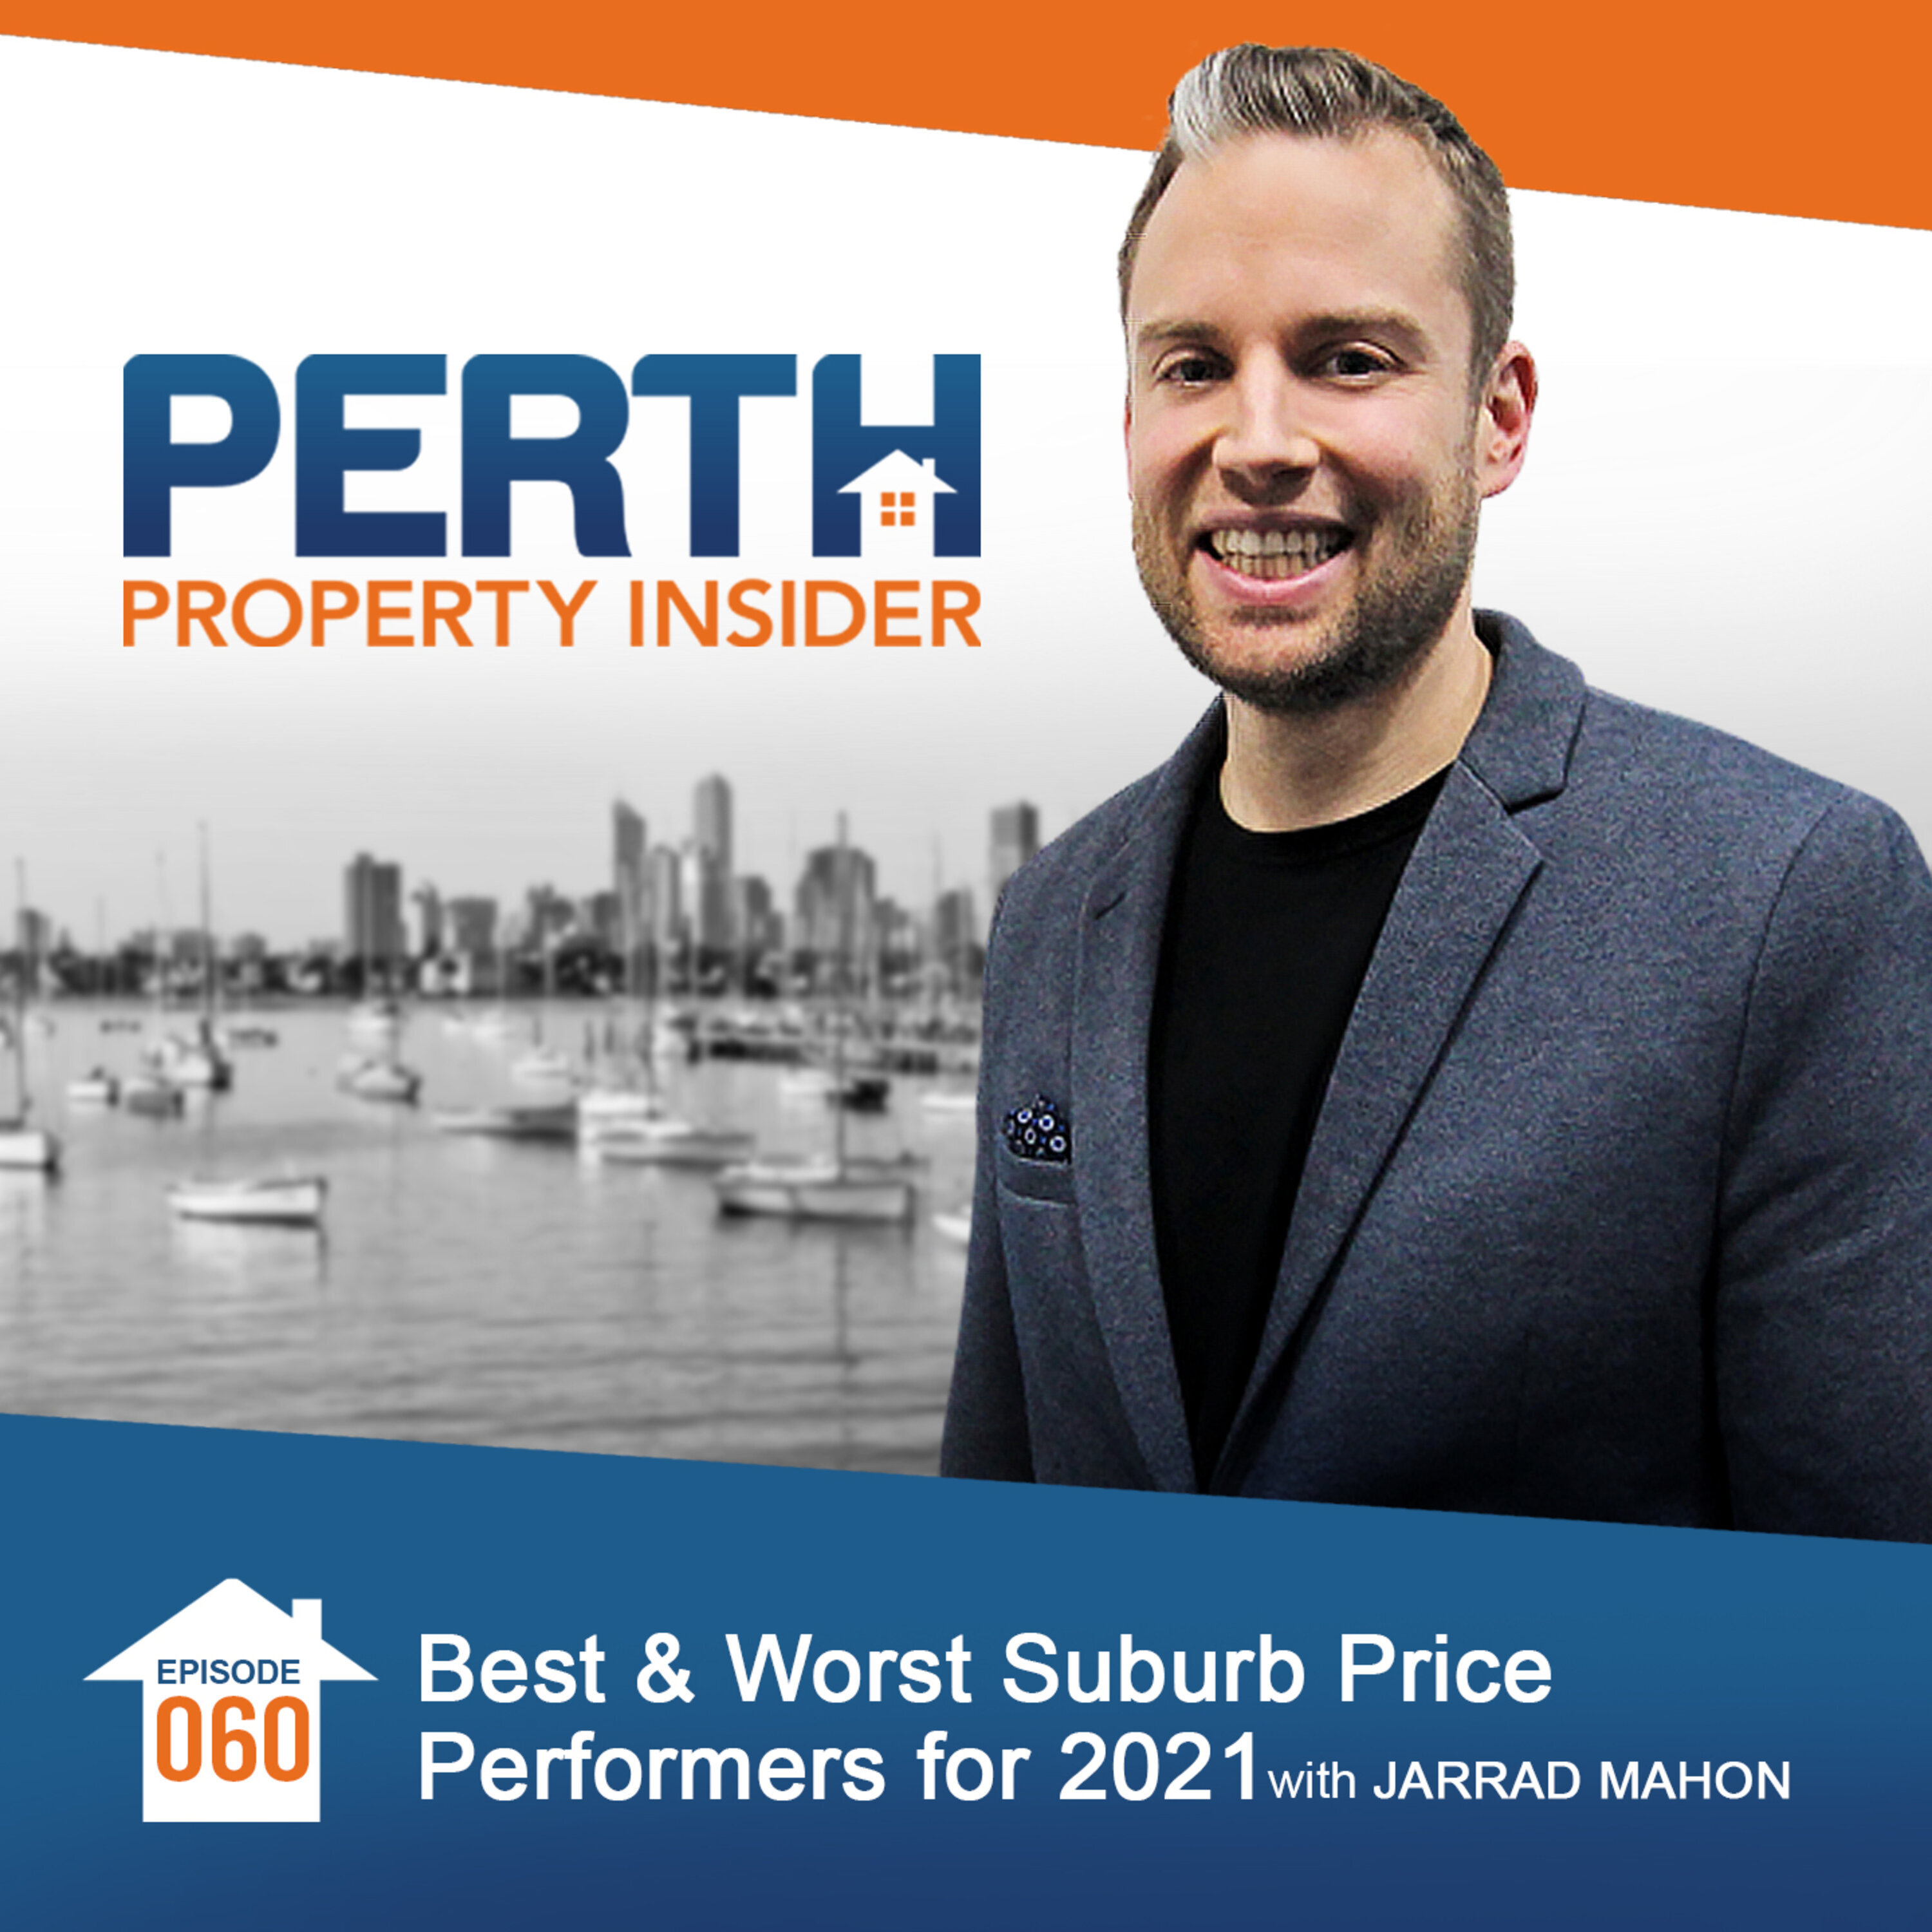 Best & Worst Suburb Price Performers for 2021